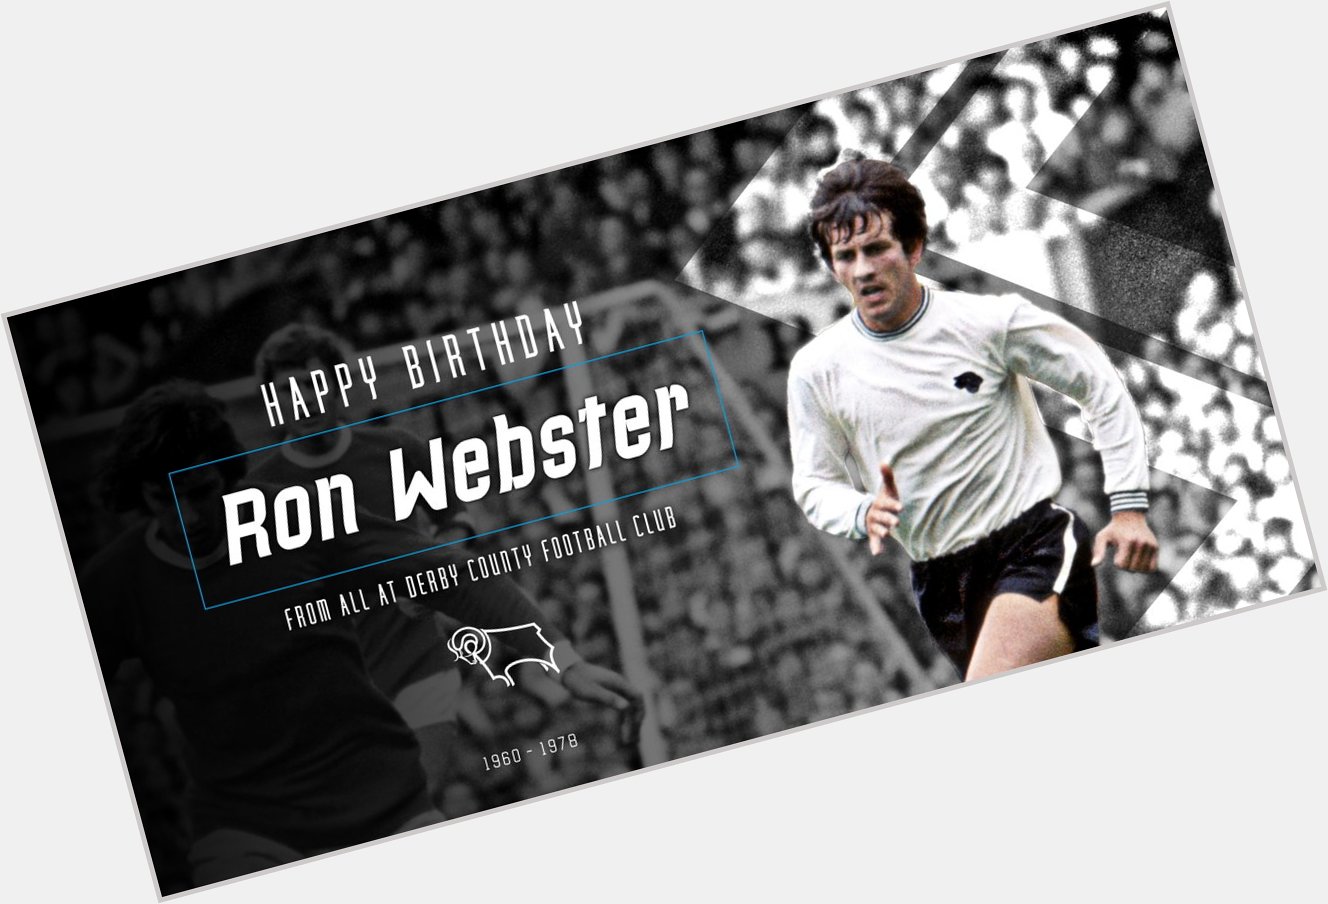 Happy birthday to popular former Rams, Ron Webster and Dean Saunders. 